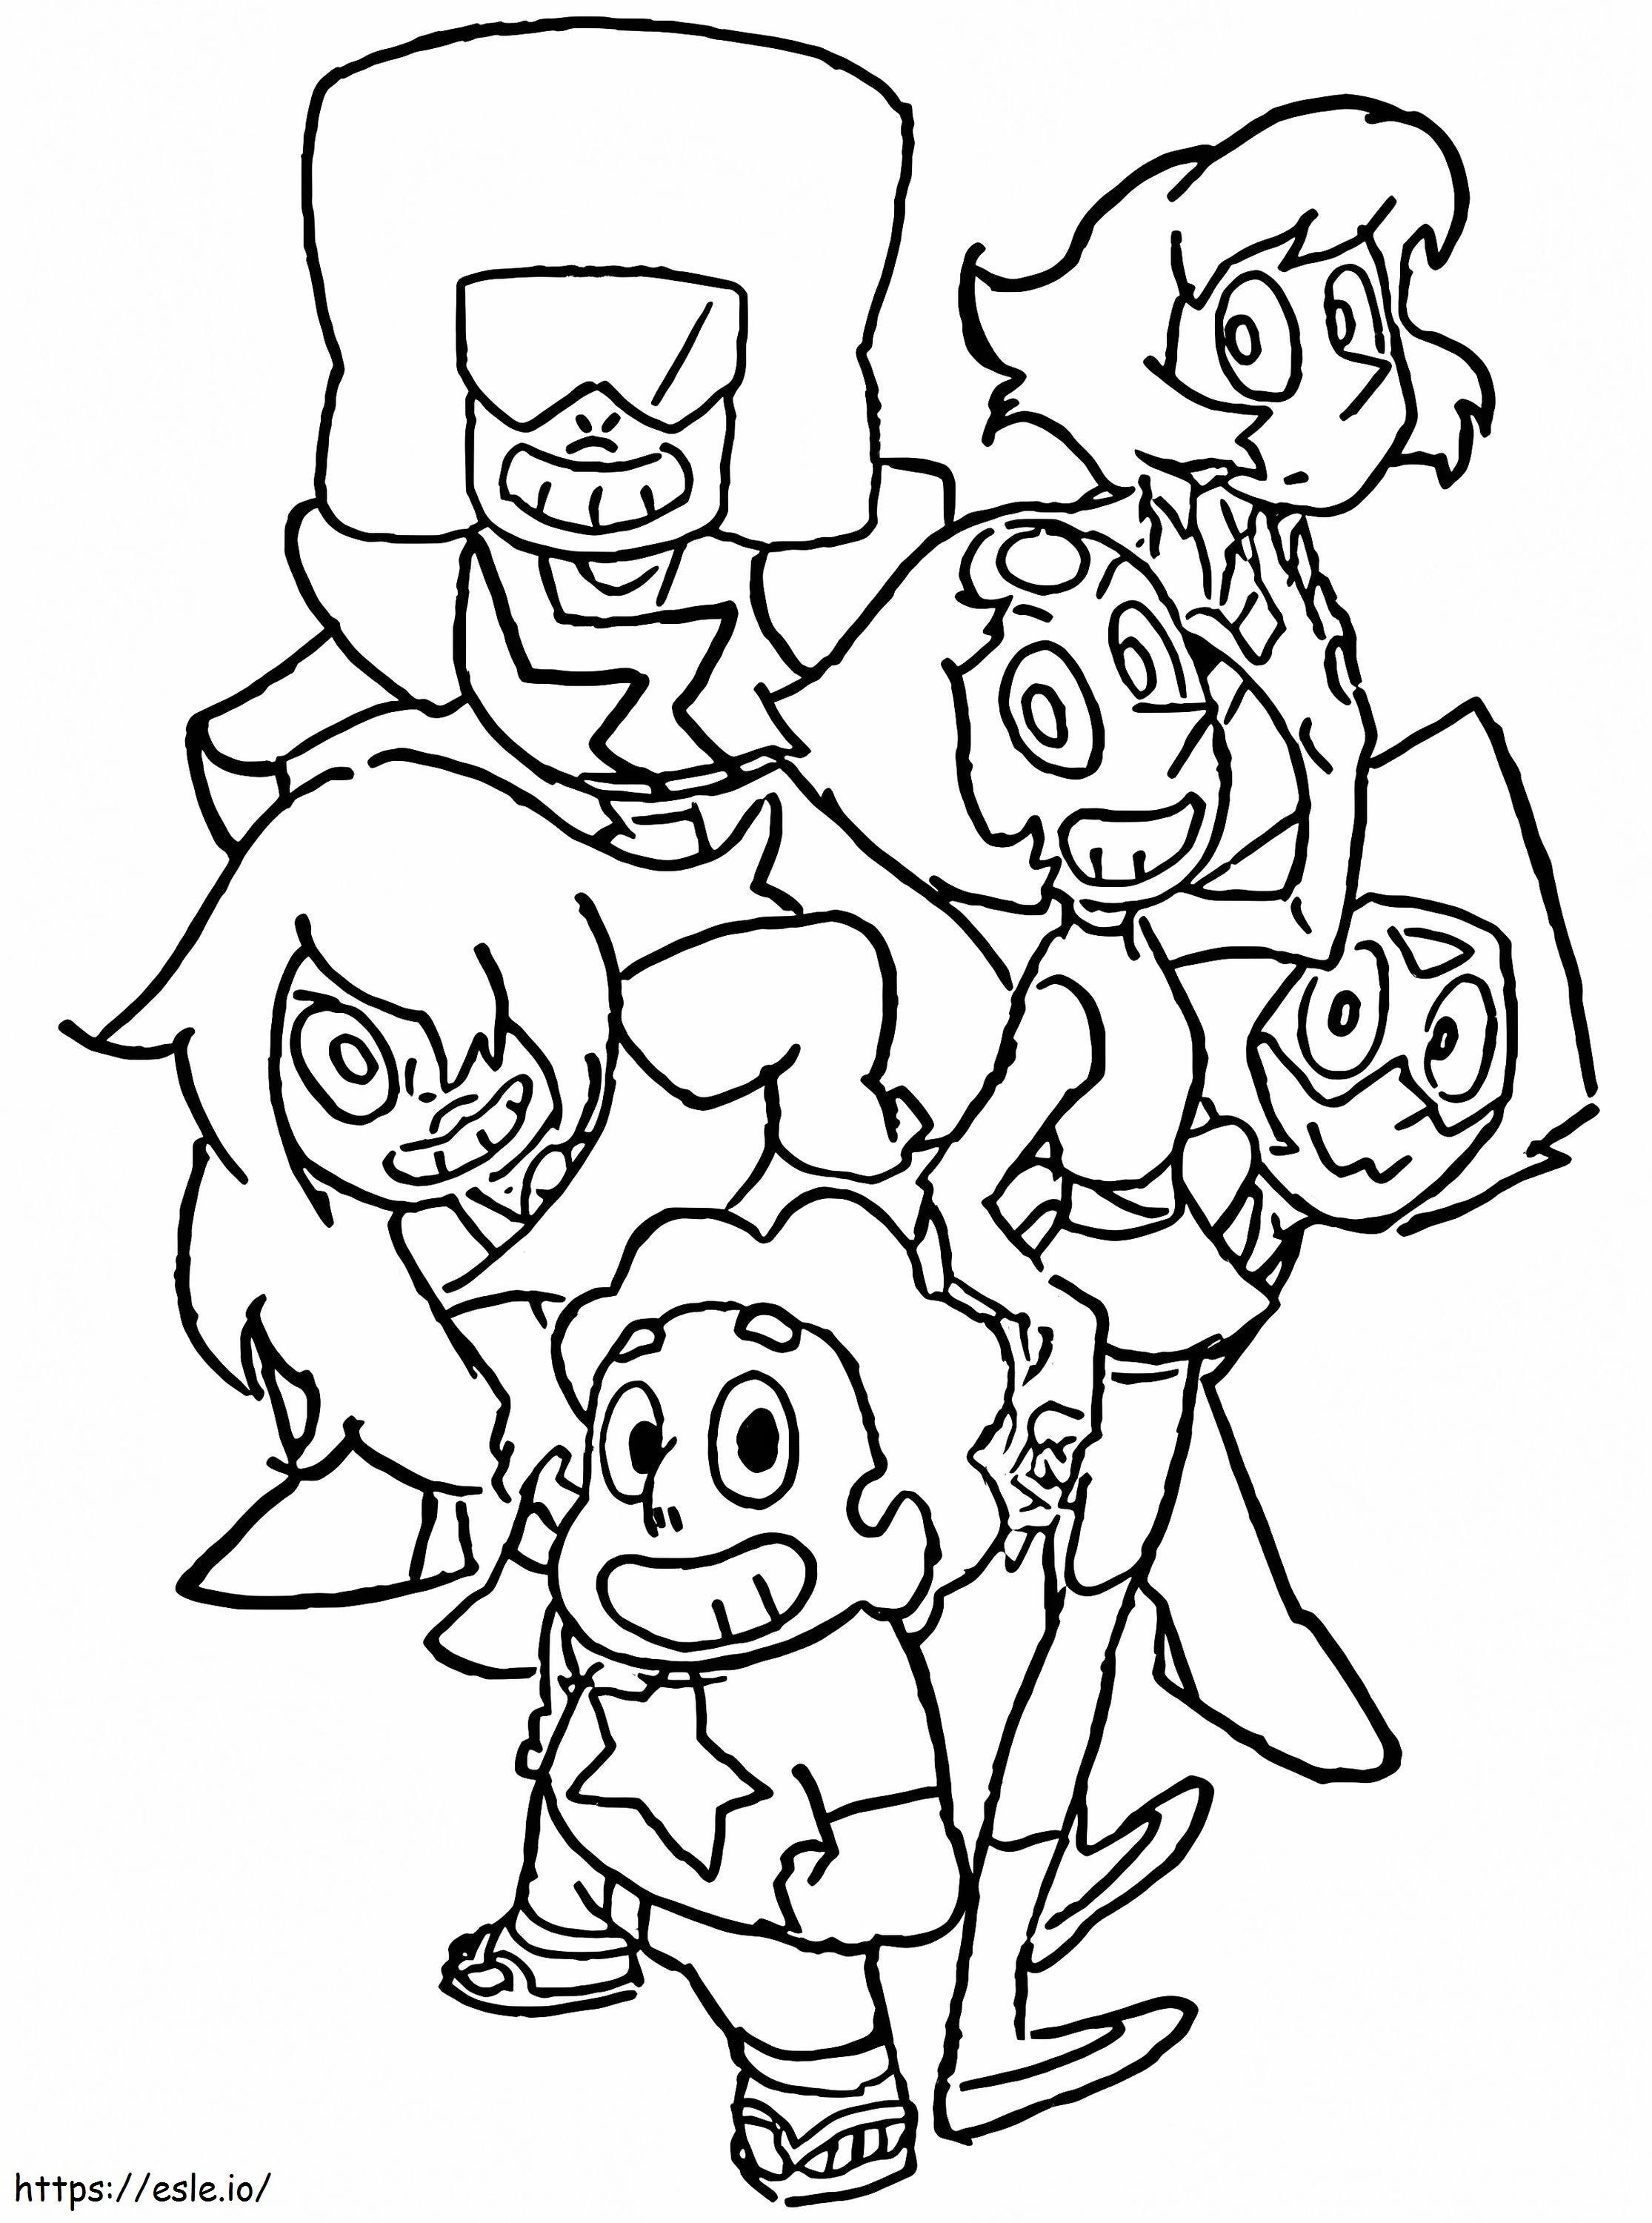 Steven And His Fun Friends coloring page